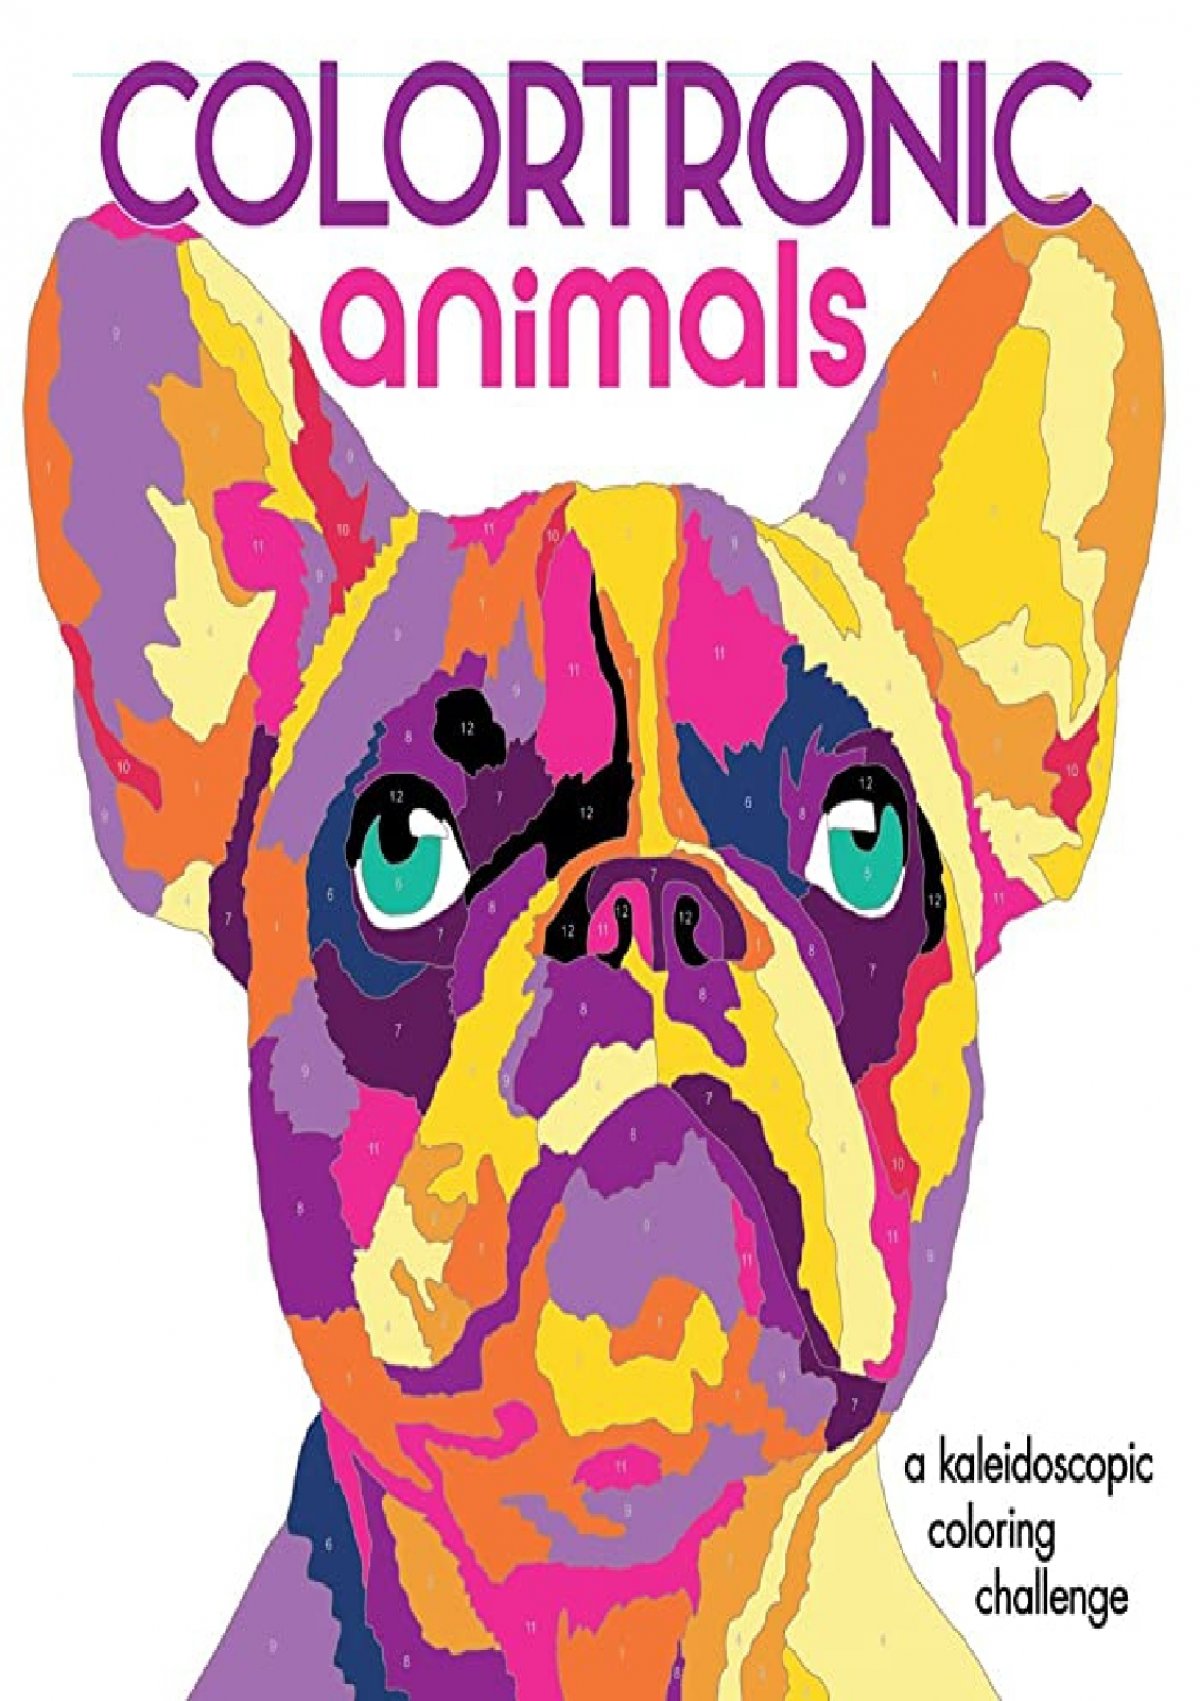 Download Pdf Read Online Colortronic Animals A Kaleidoscopic Coloring Challenge Free Acces